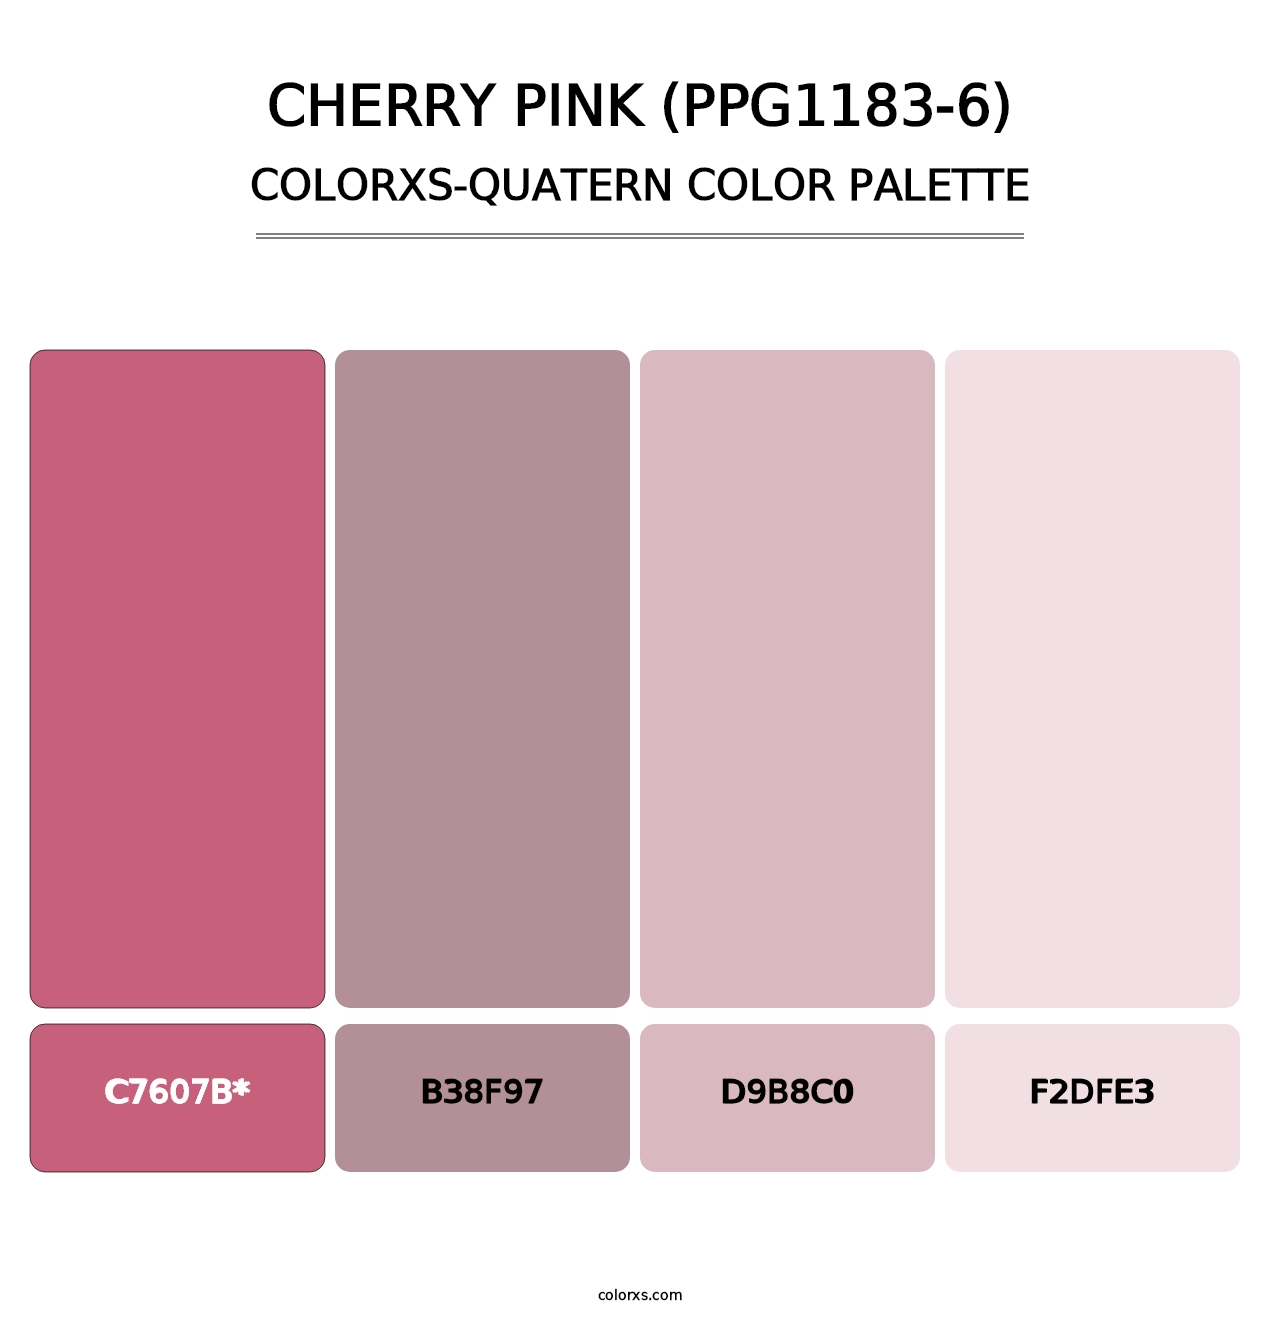 Cherry Pink (PPG1183-6) - Colorxs Quatern Palette